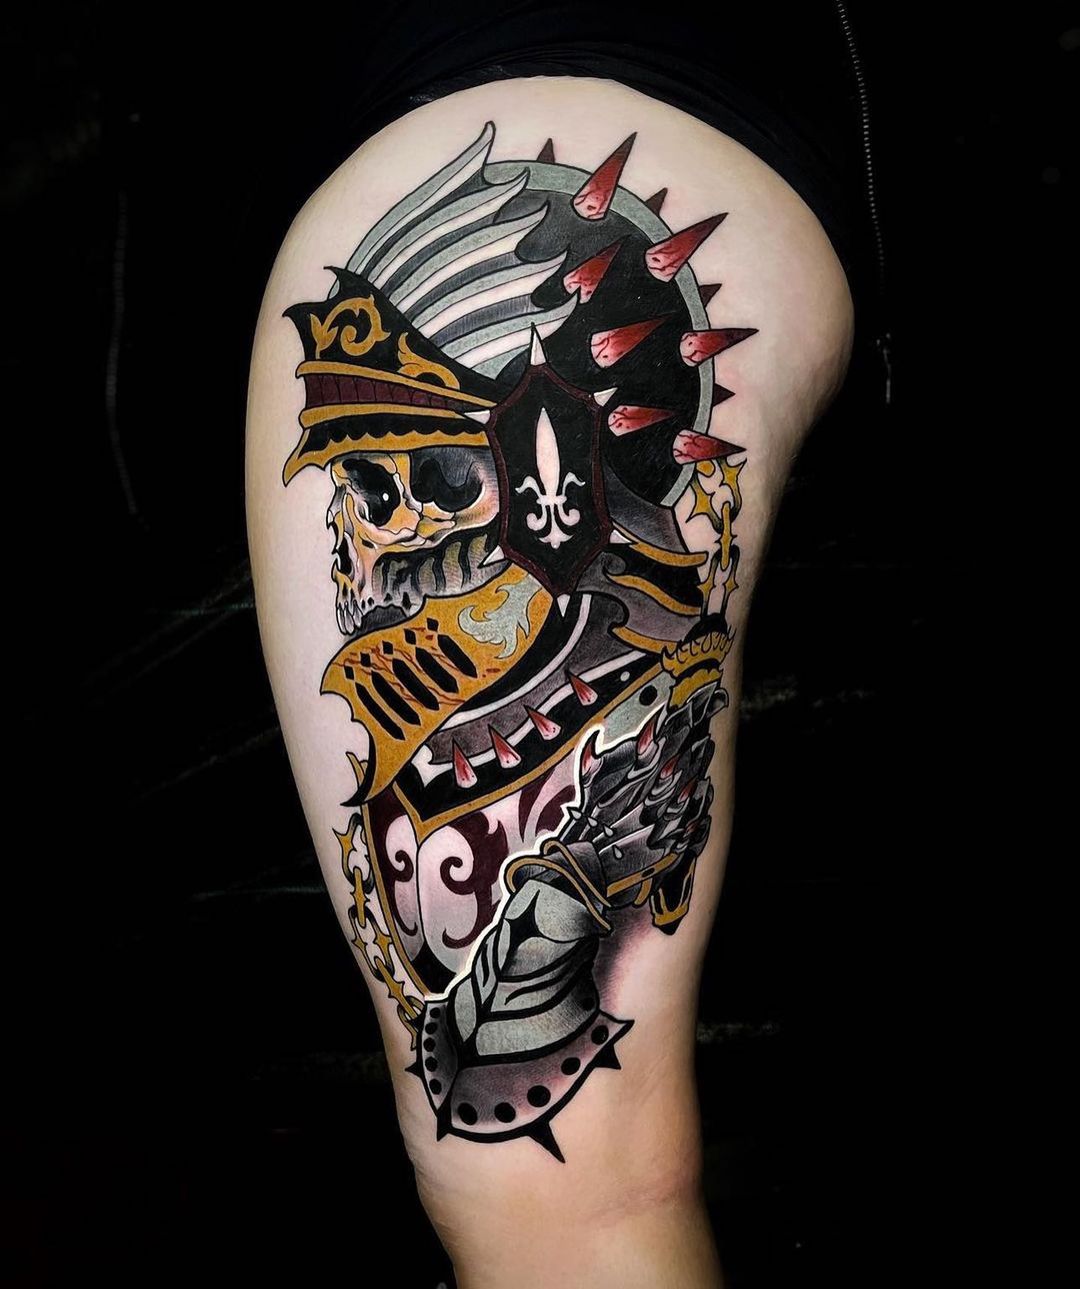 Elite Knight Scared of Mushrooms done by Jake Faldet at Affliction Ink in  WI. : r/tattoos